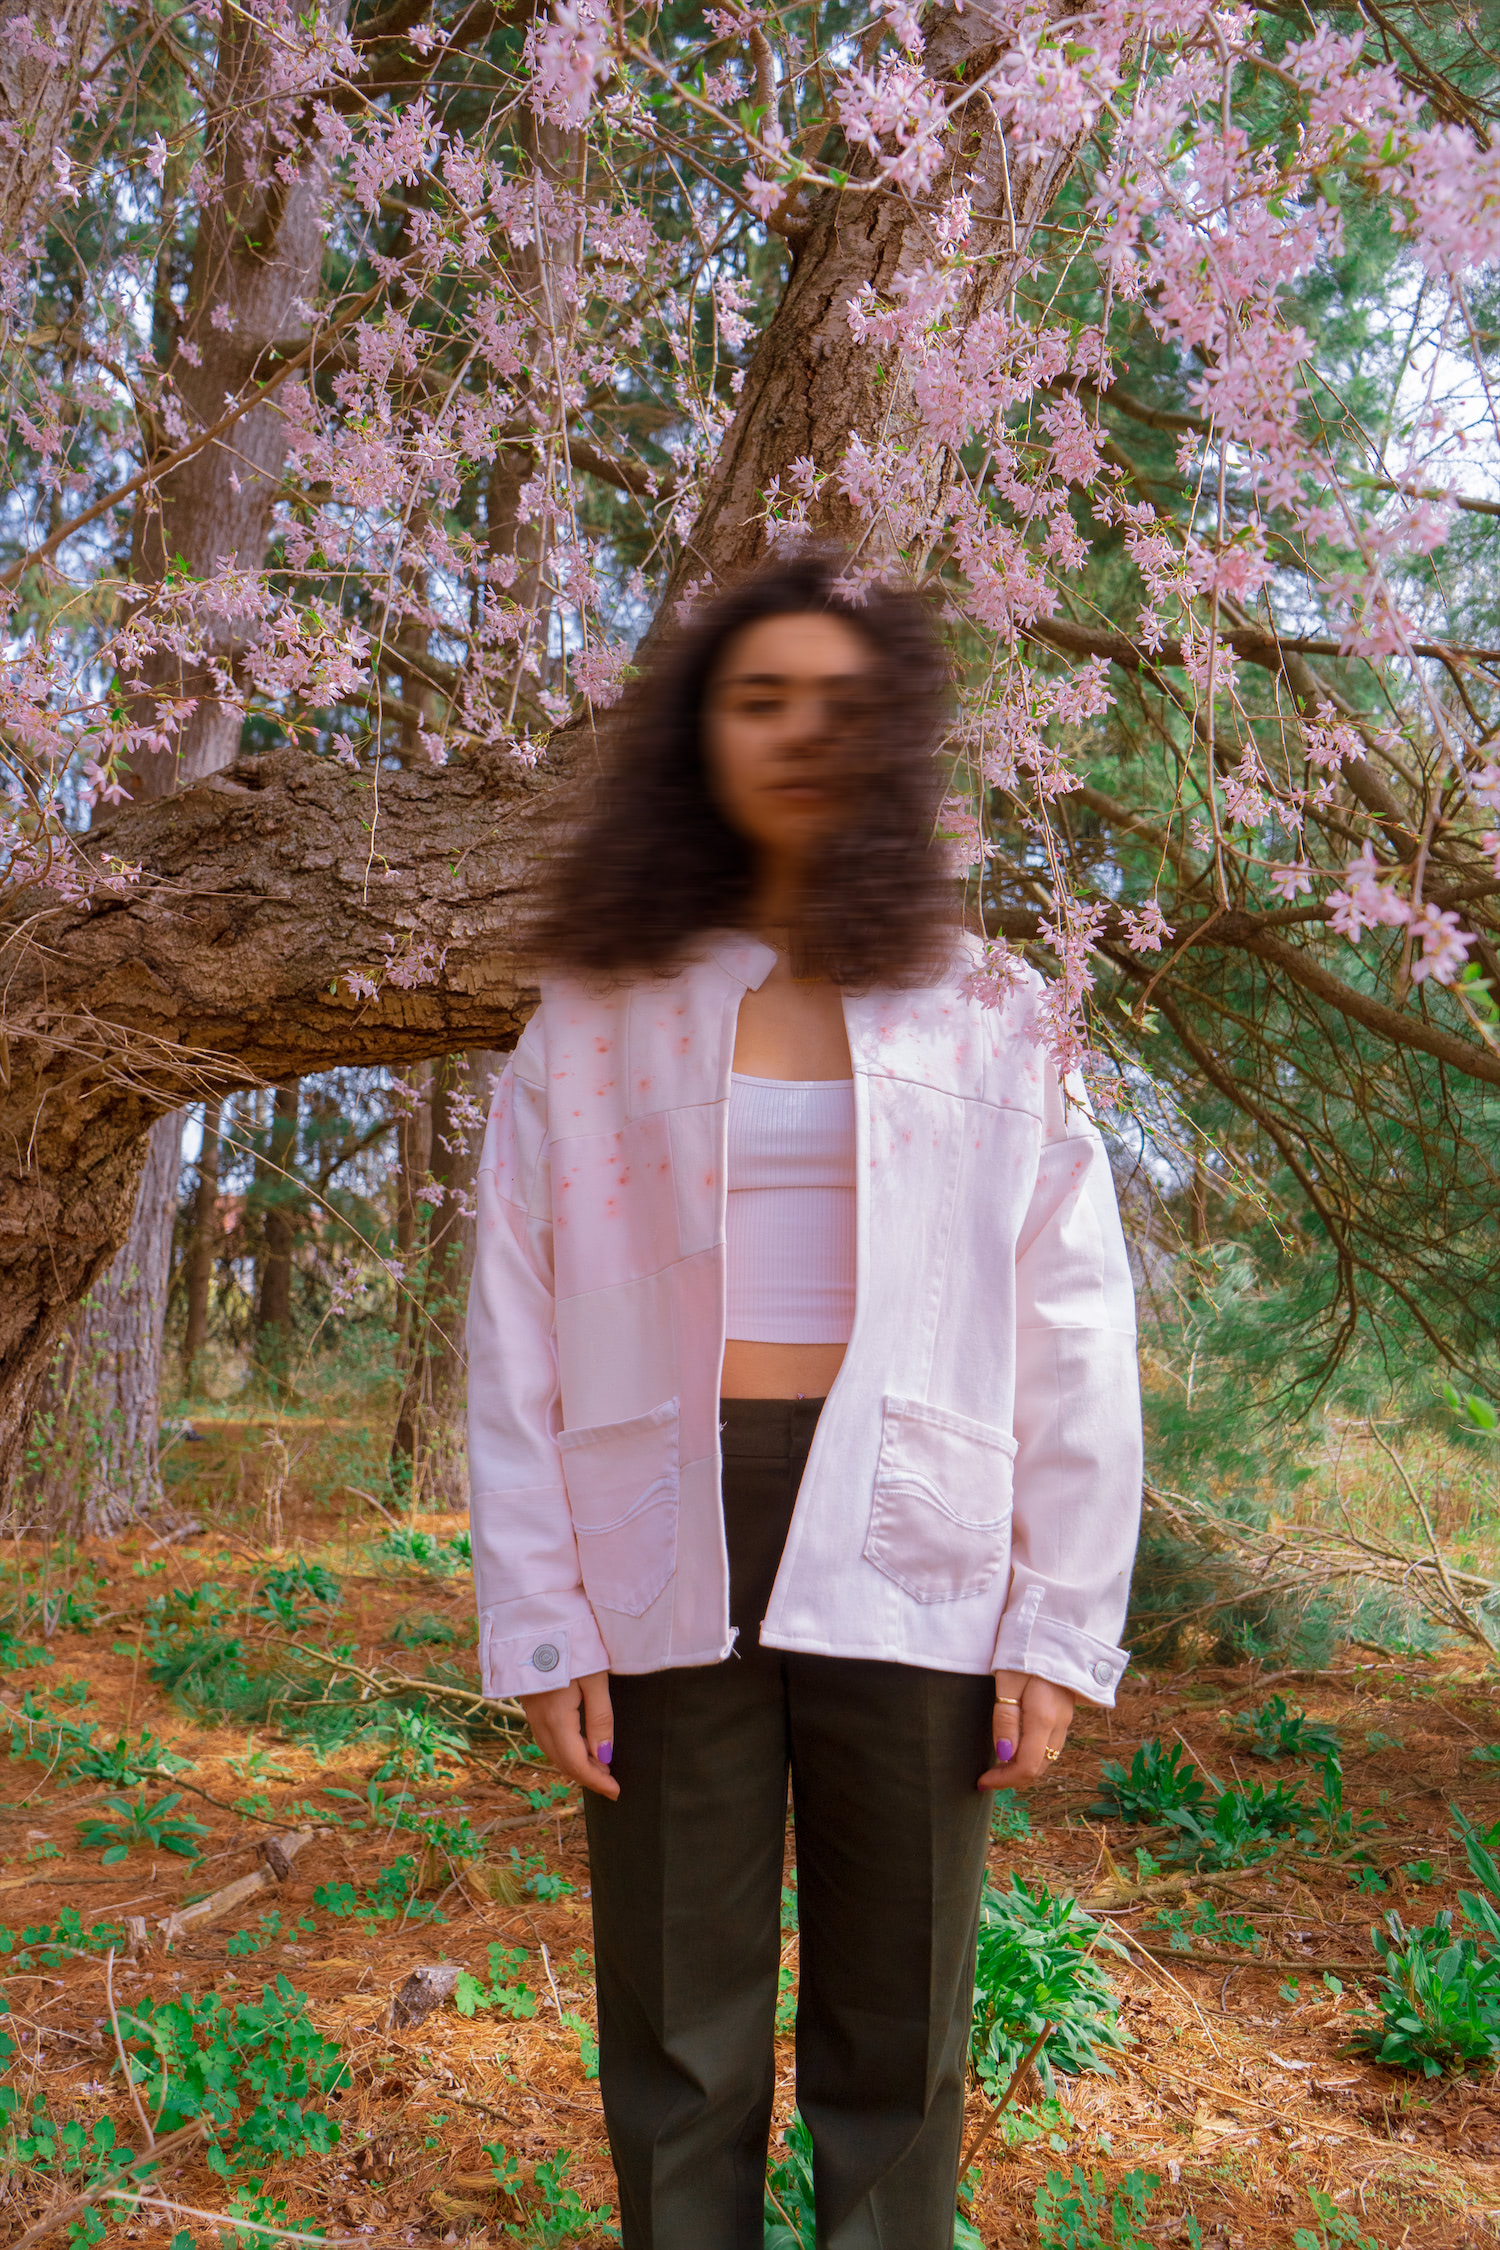 Model wearing acne jacket, facing camera, under a blossoming tree